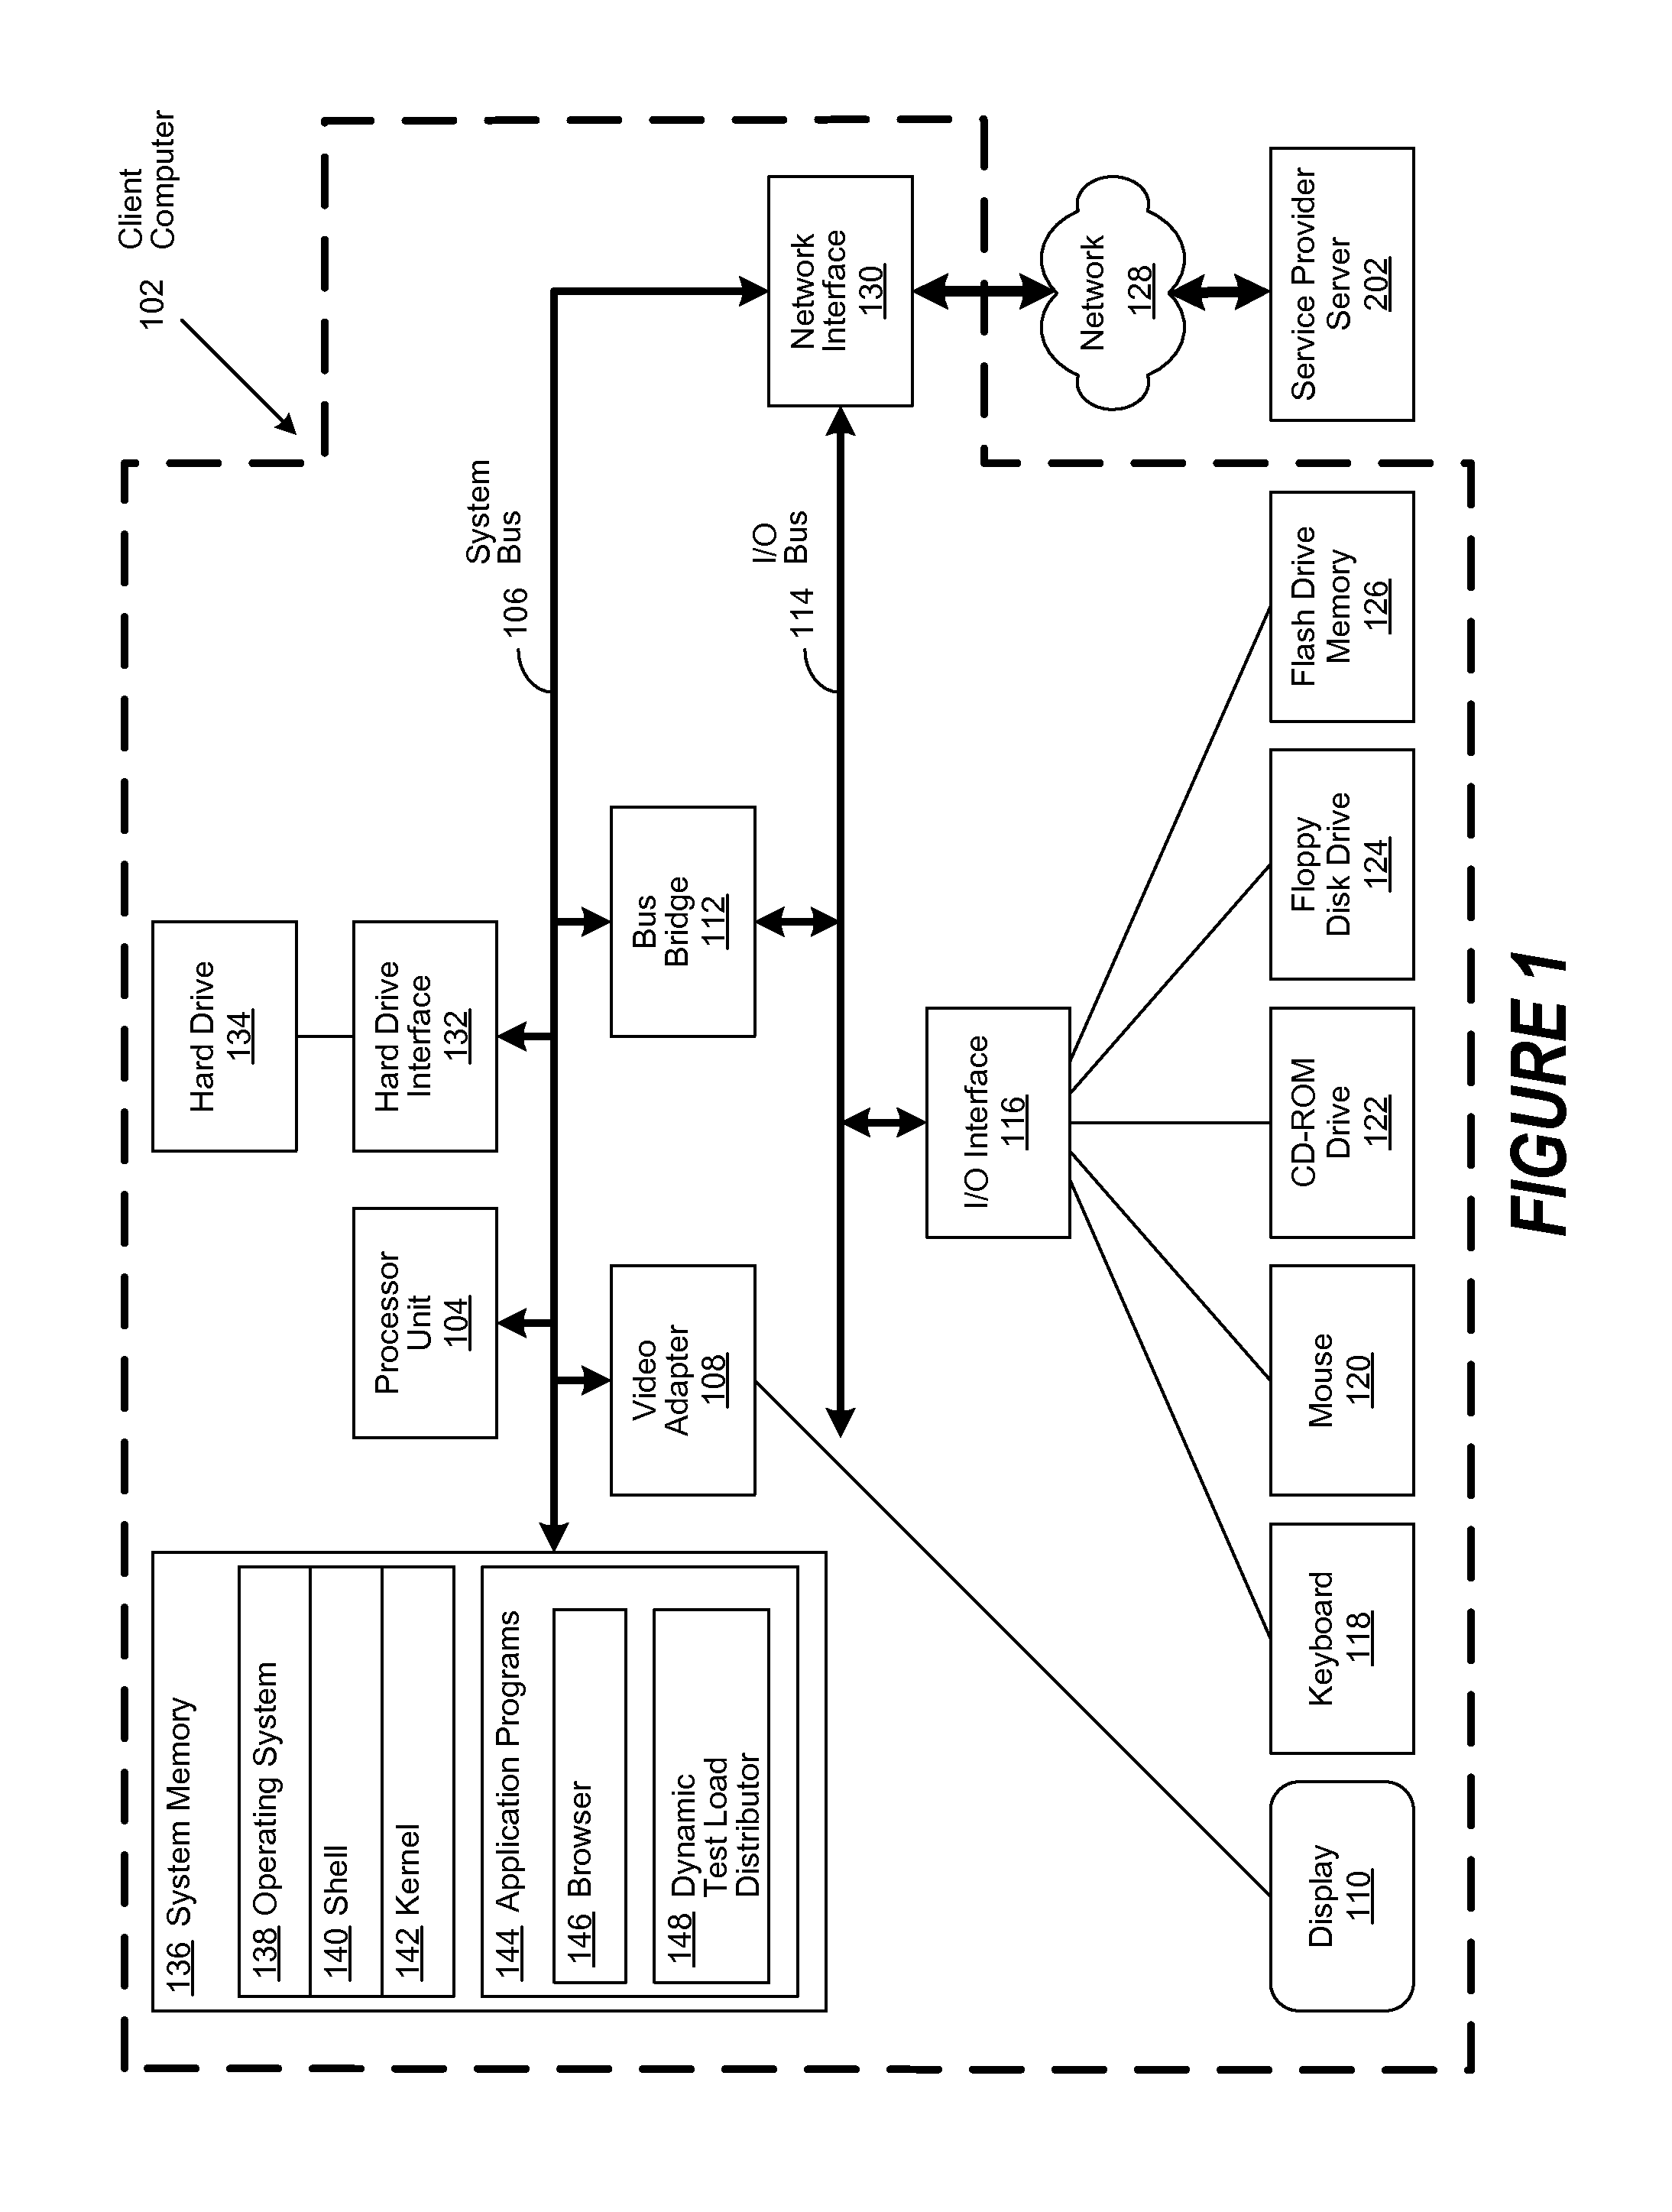 System and Method to Optimally Manage Performance's Virtual Users and Test Cases